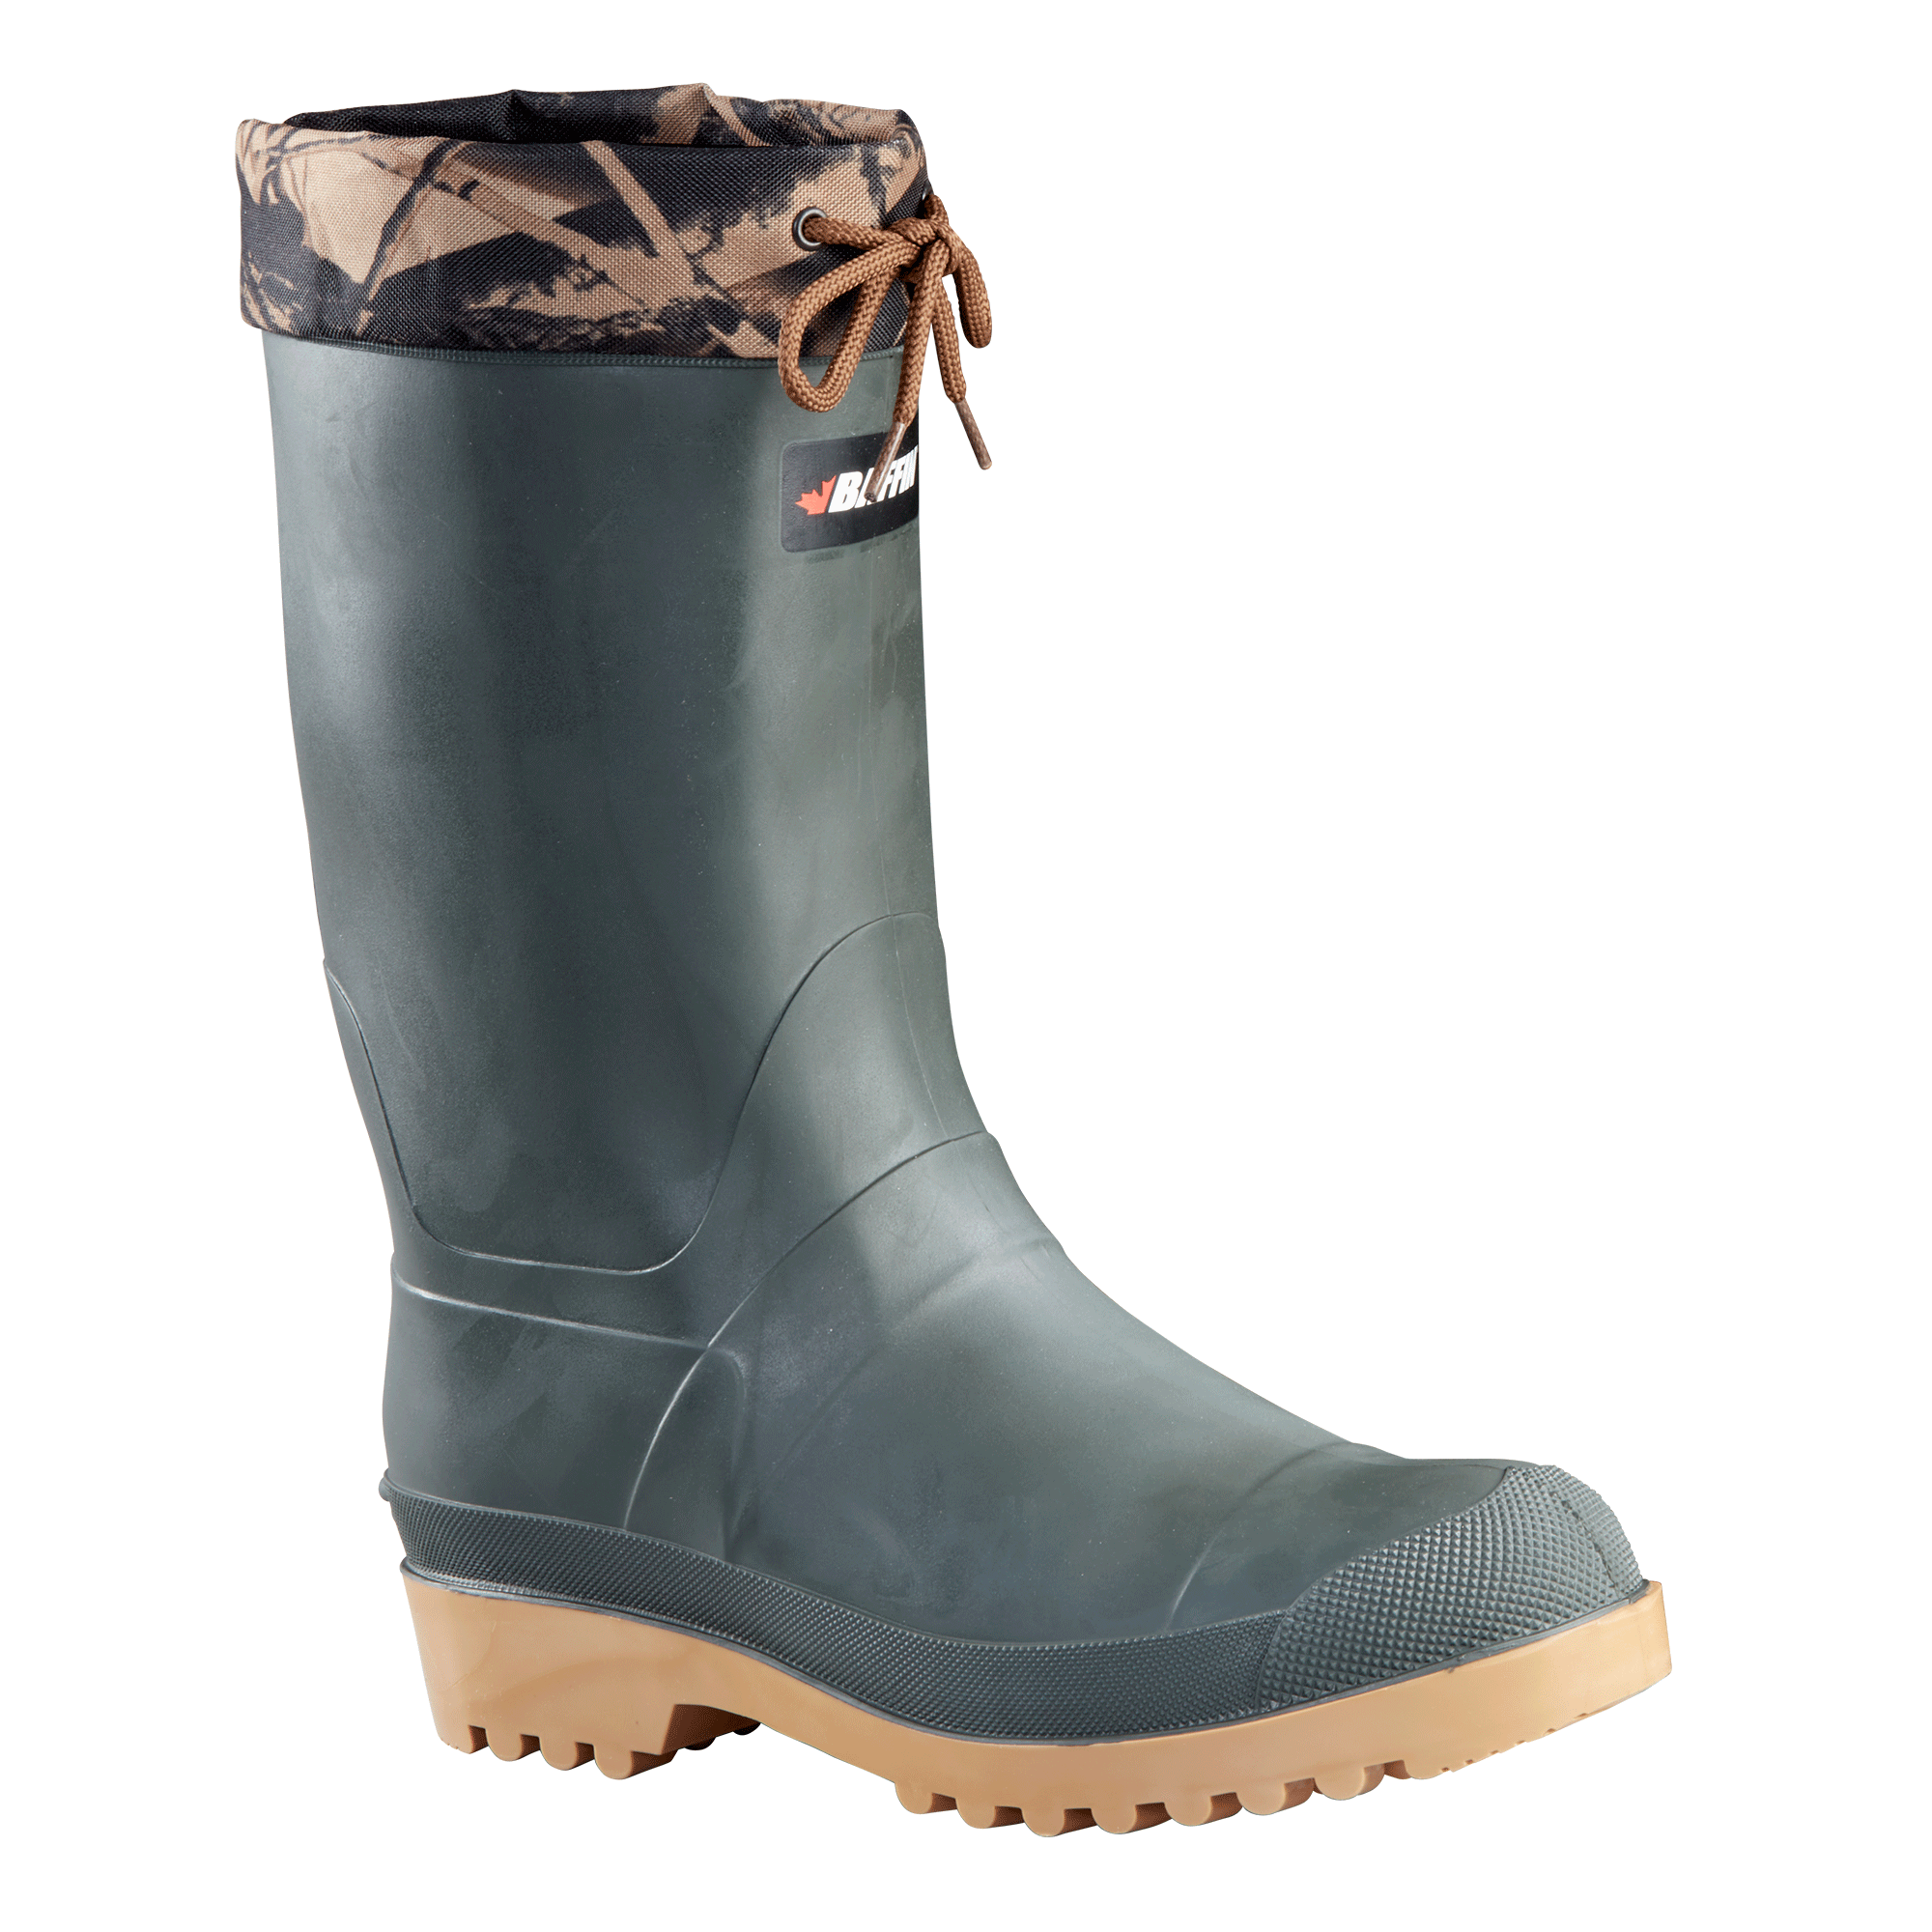 TRAPPER | Men's Boot 12 / Forest from Baffin